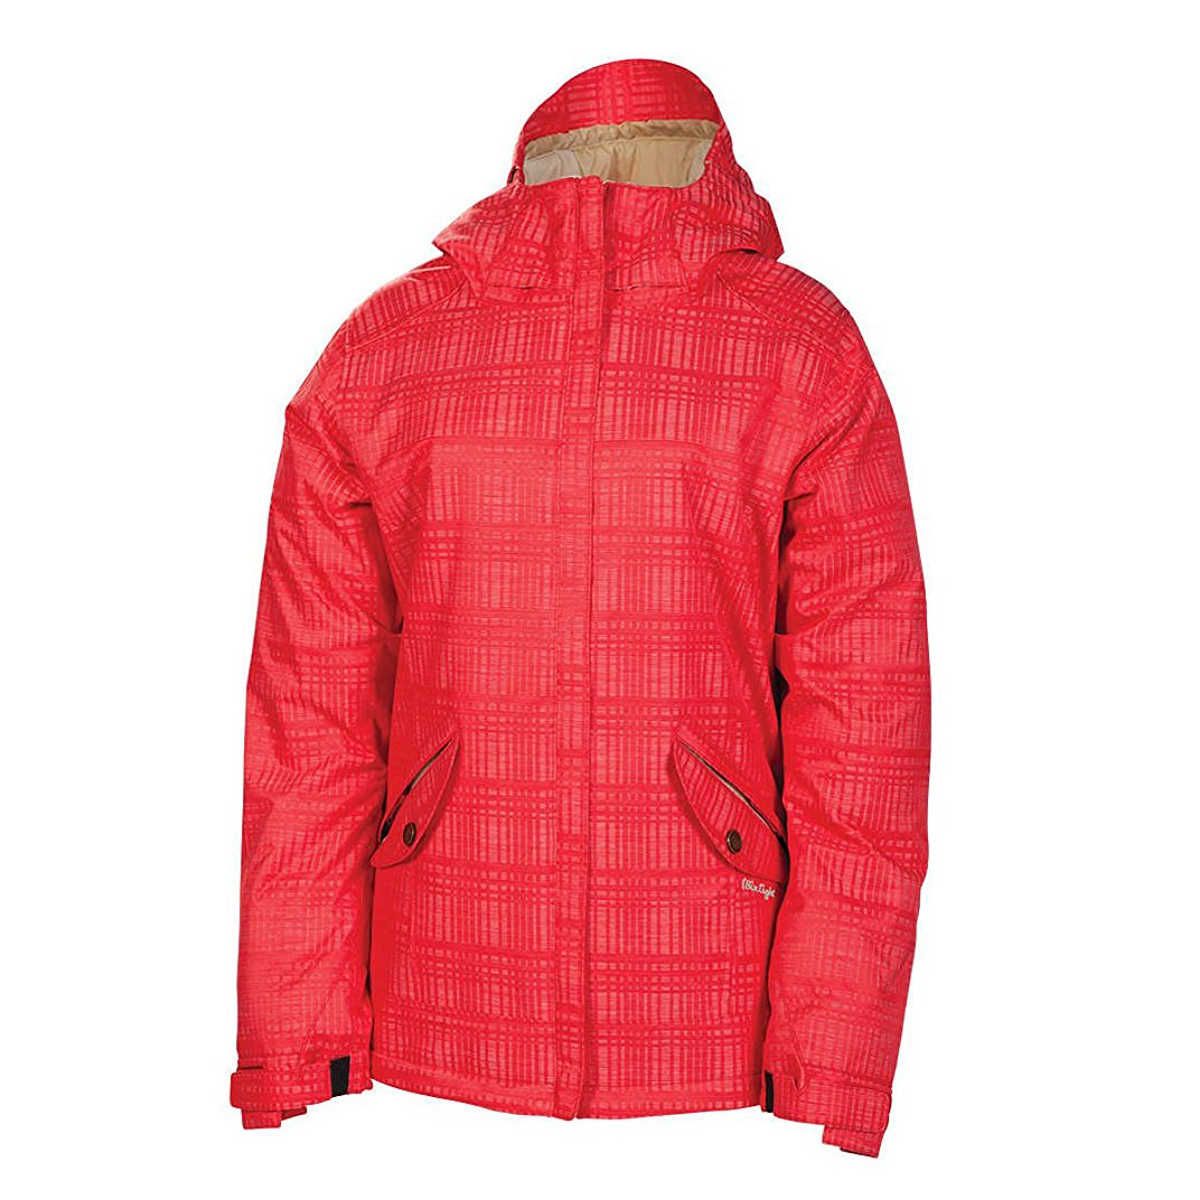 Reserved Luster Jacket - Watermelon